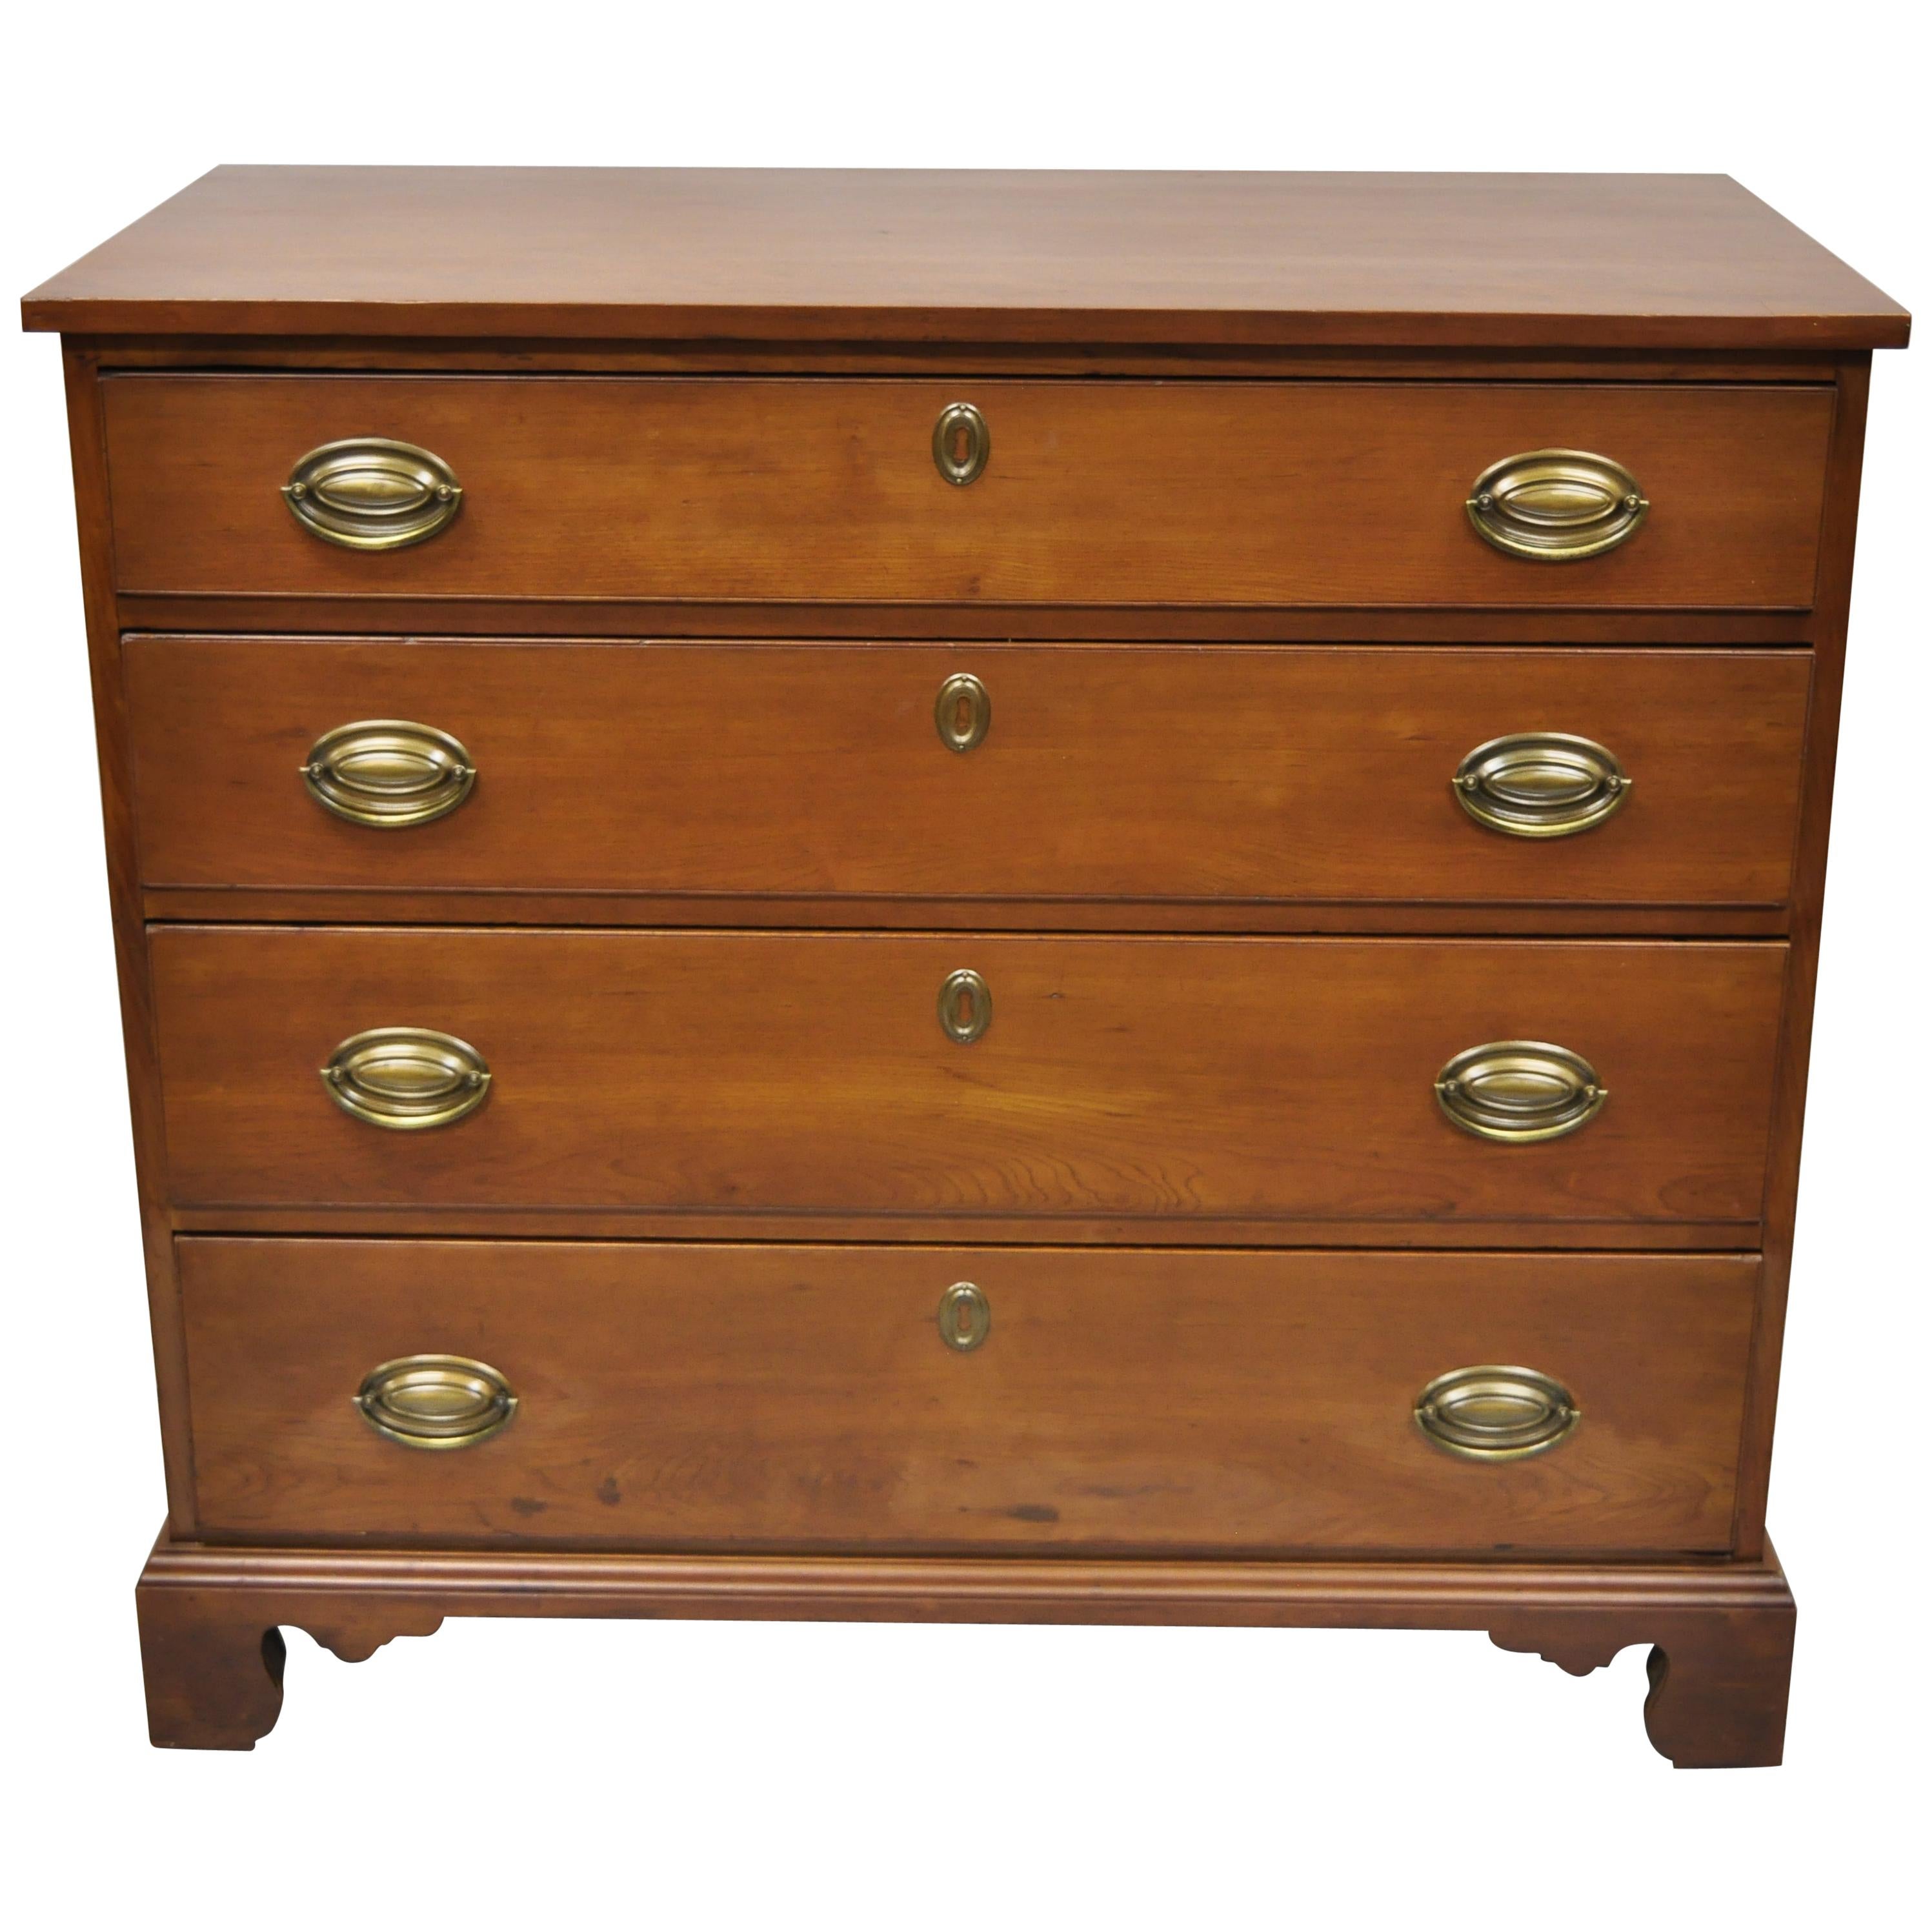 19th Century Antique Mahogany Federal Dresser Commode Chest of Drawers